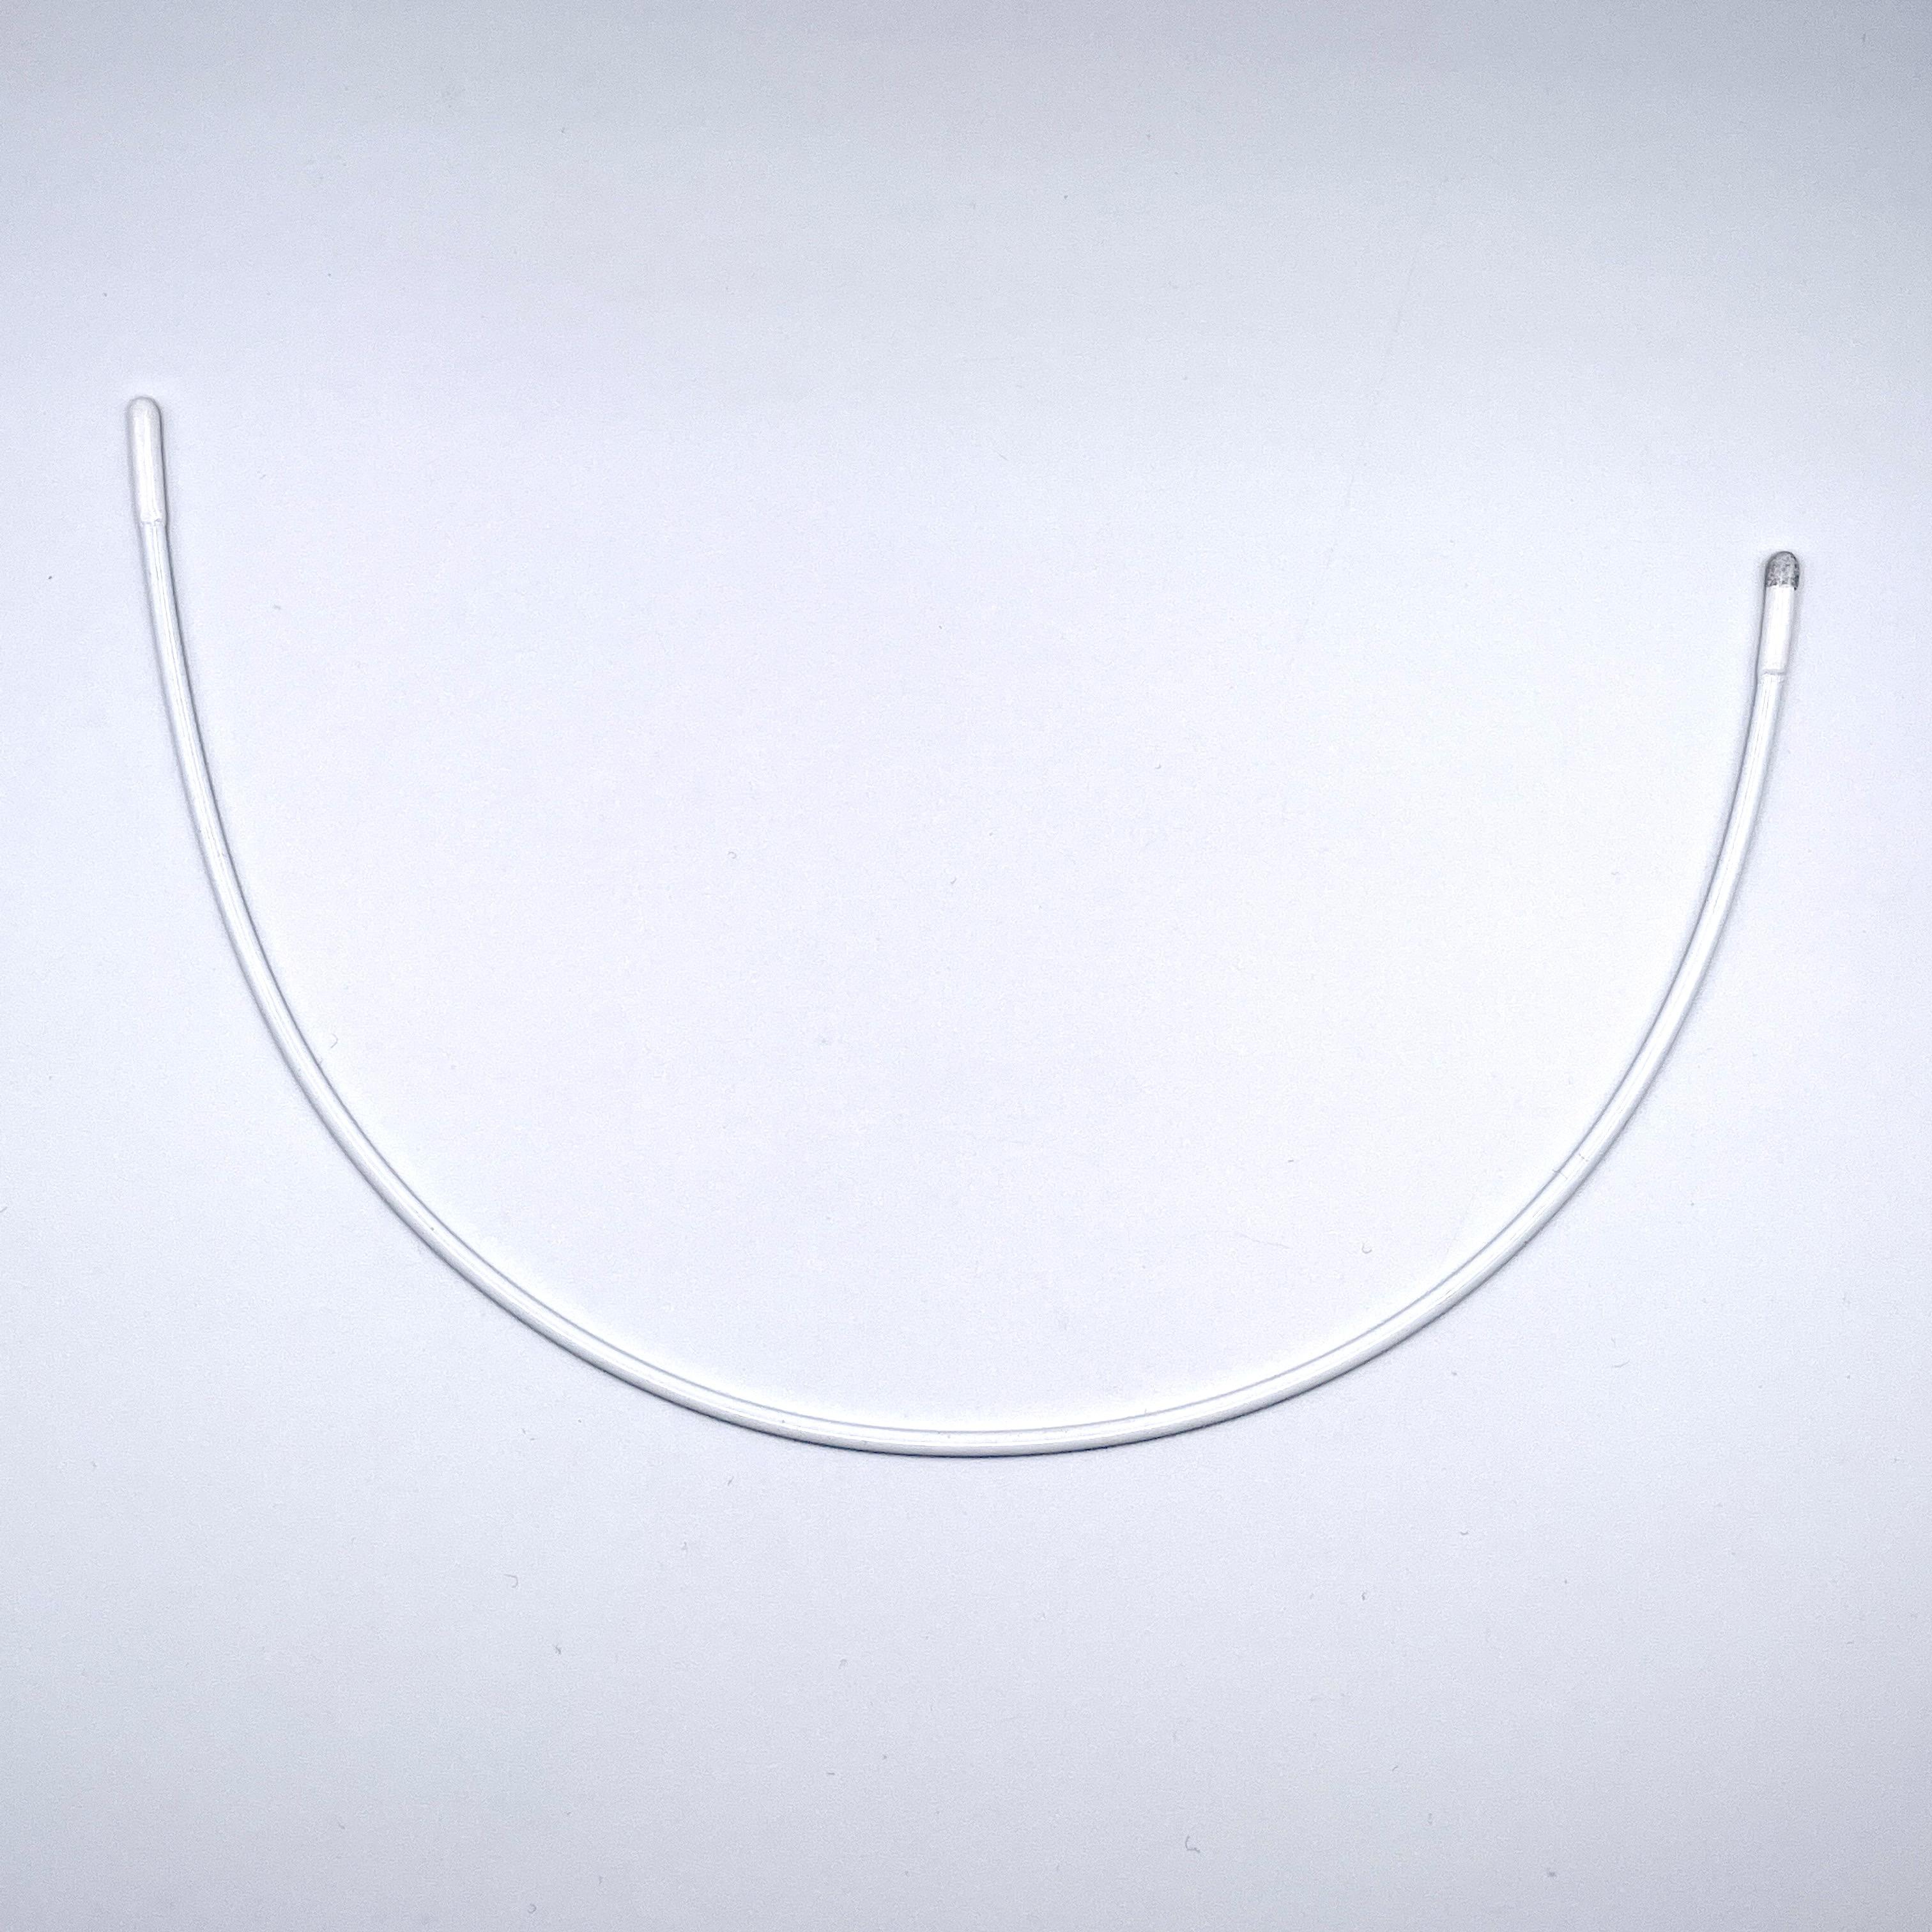 Bra Wires - Fully coated - style 14 (Minimiser), per pair - W40 (P-R44)